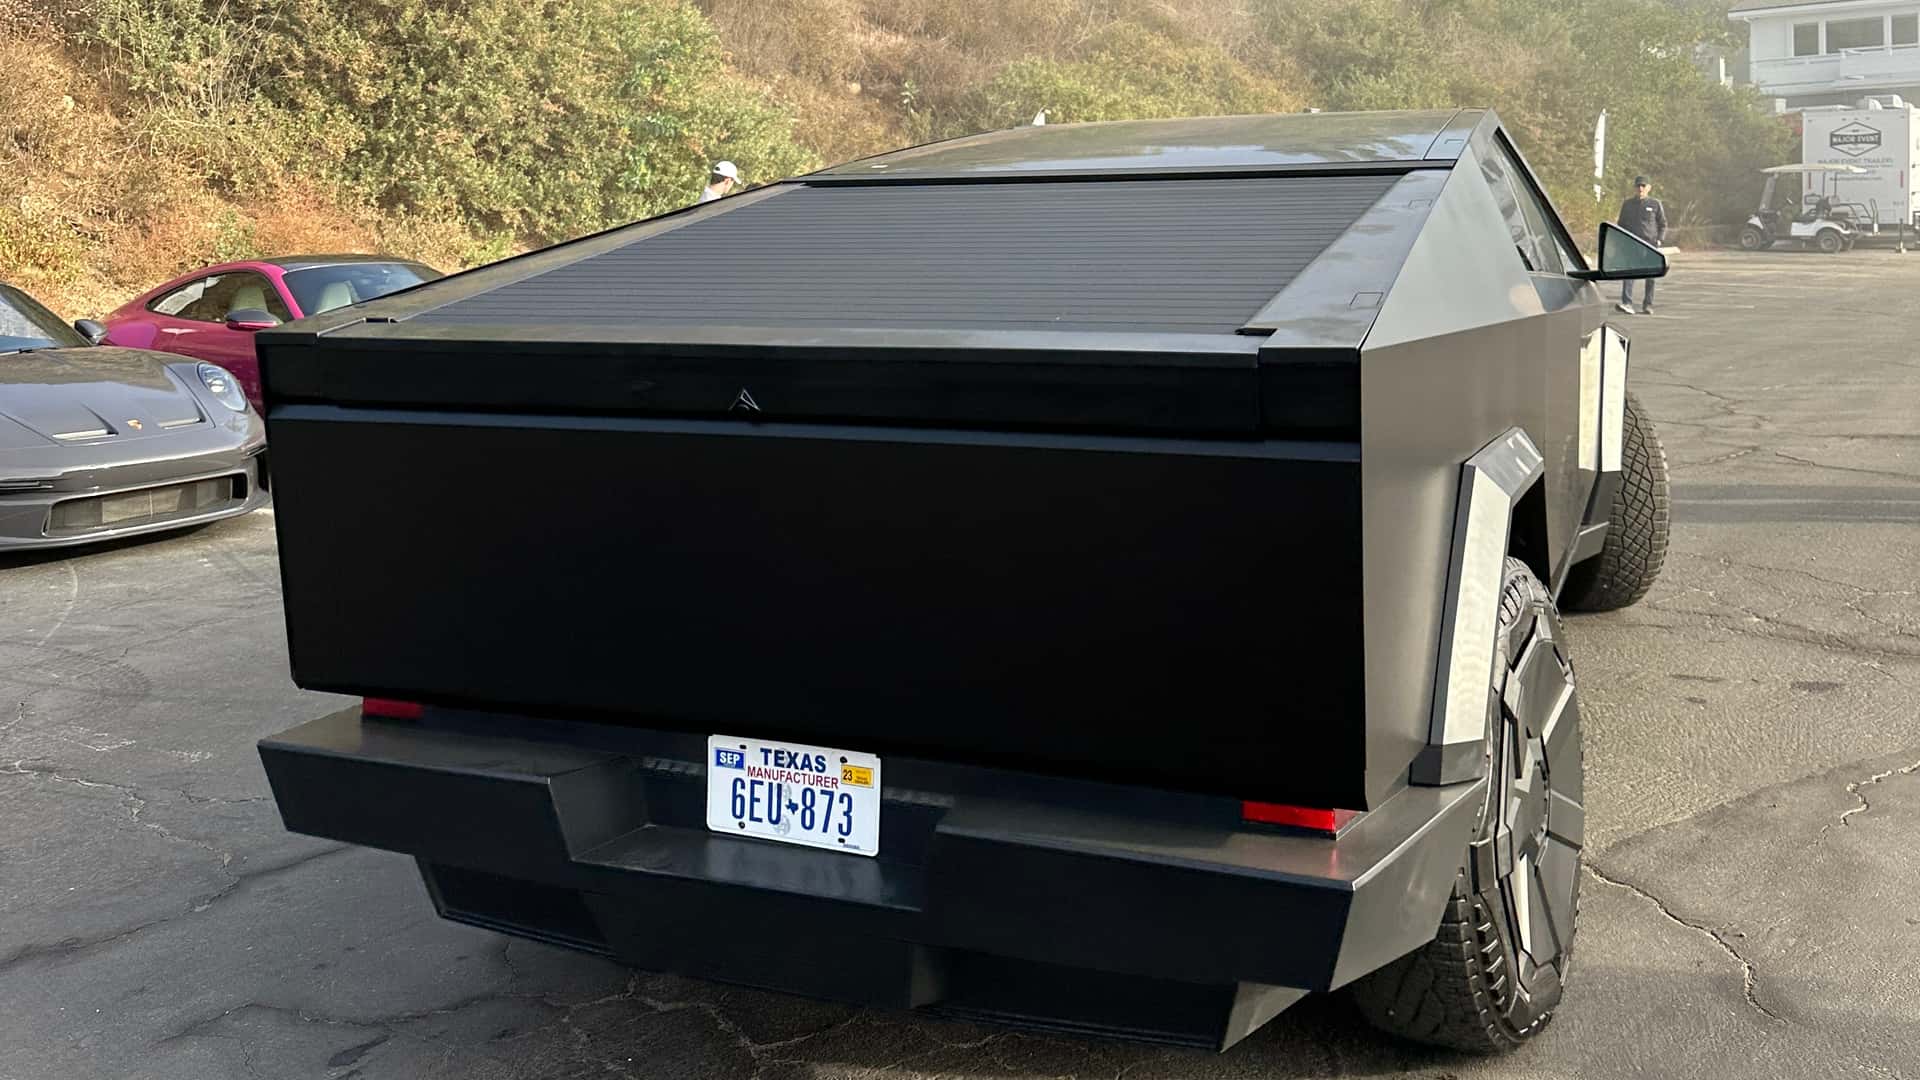 alleged tesla cybertruck specs leak. here’s how it may compare to the competition